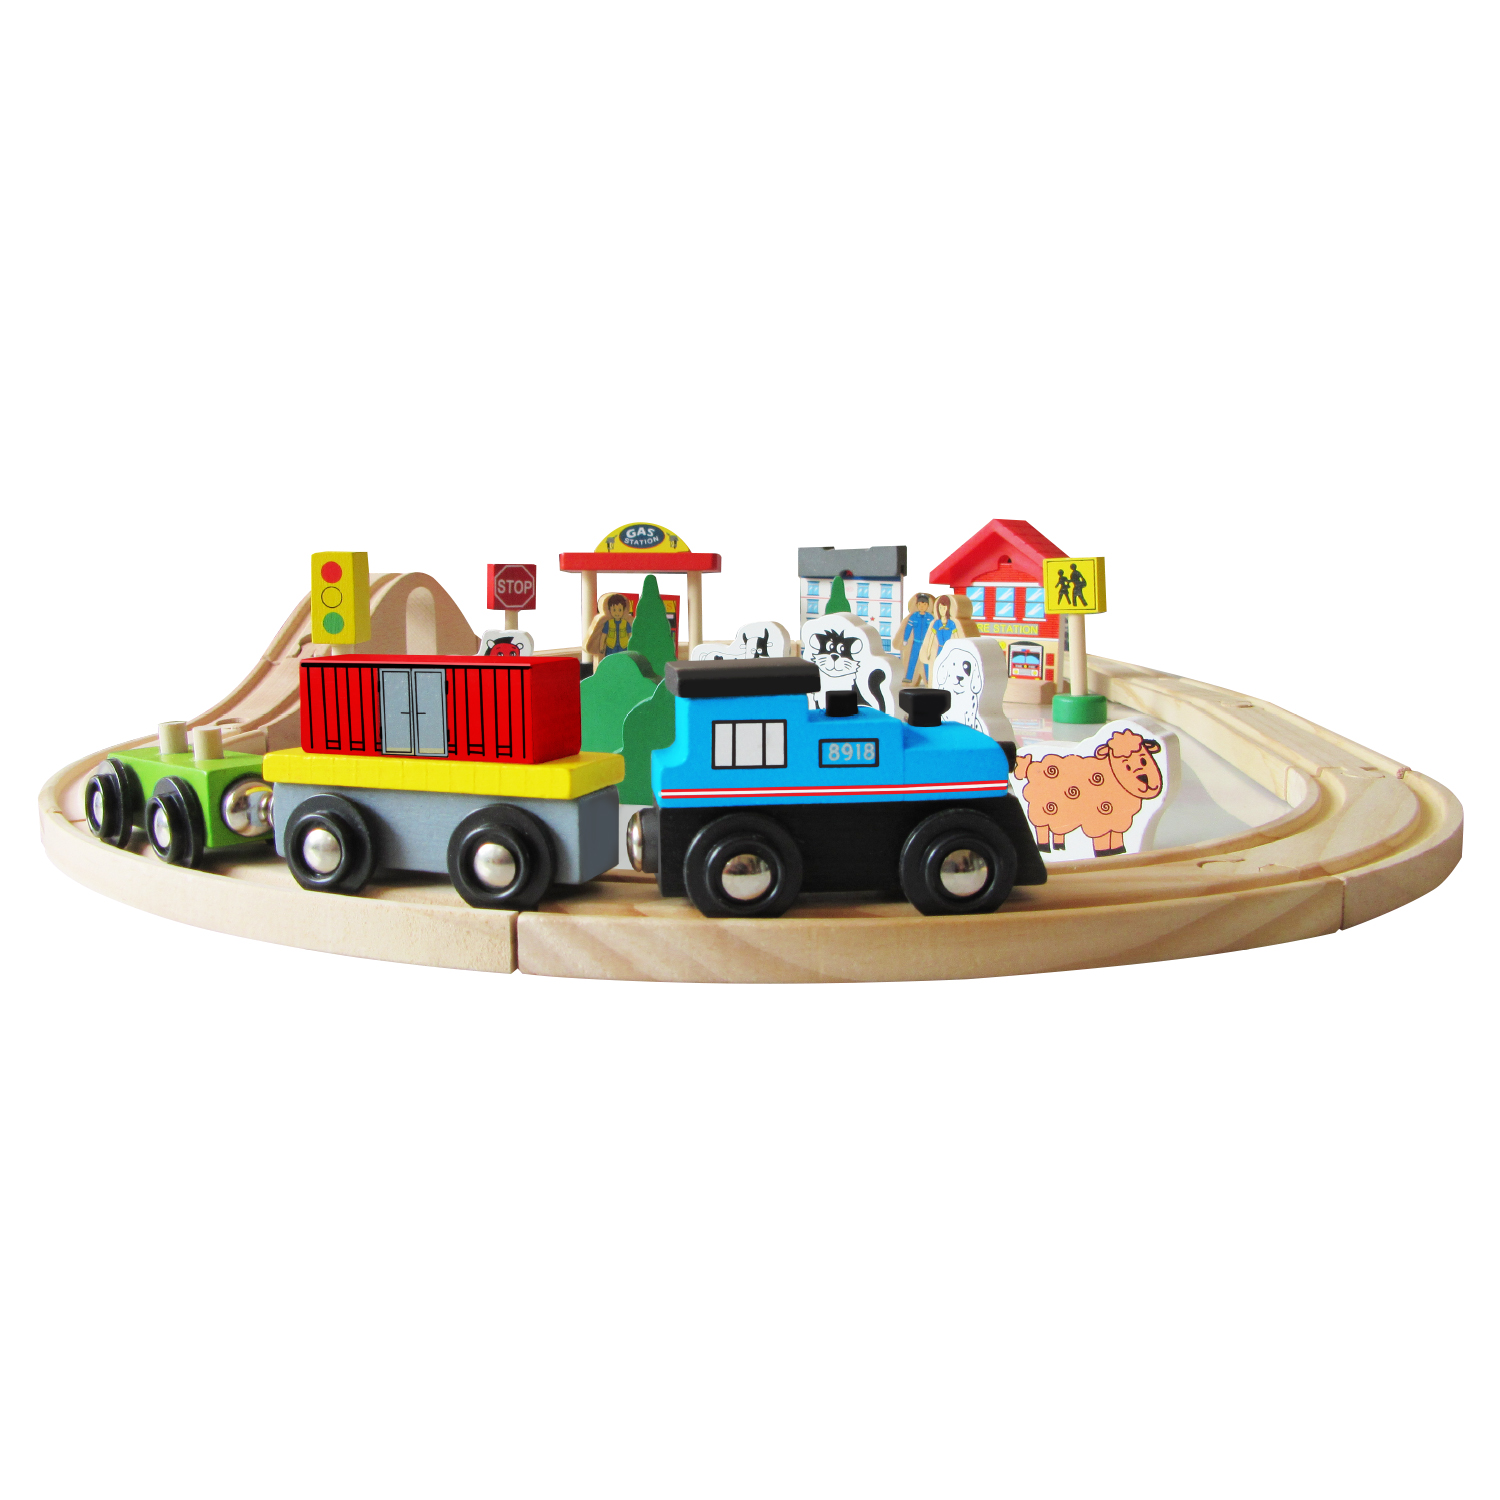 RGS wooden train set with characters and scenery